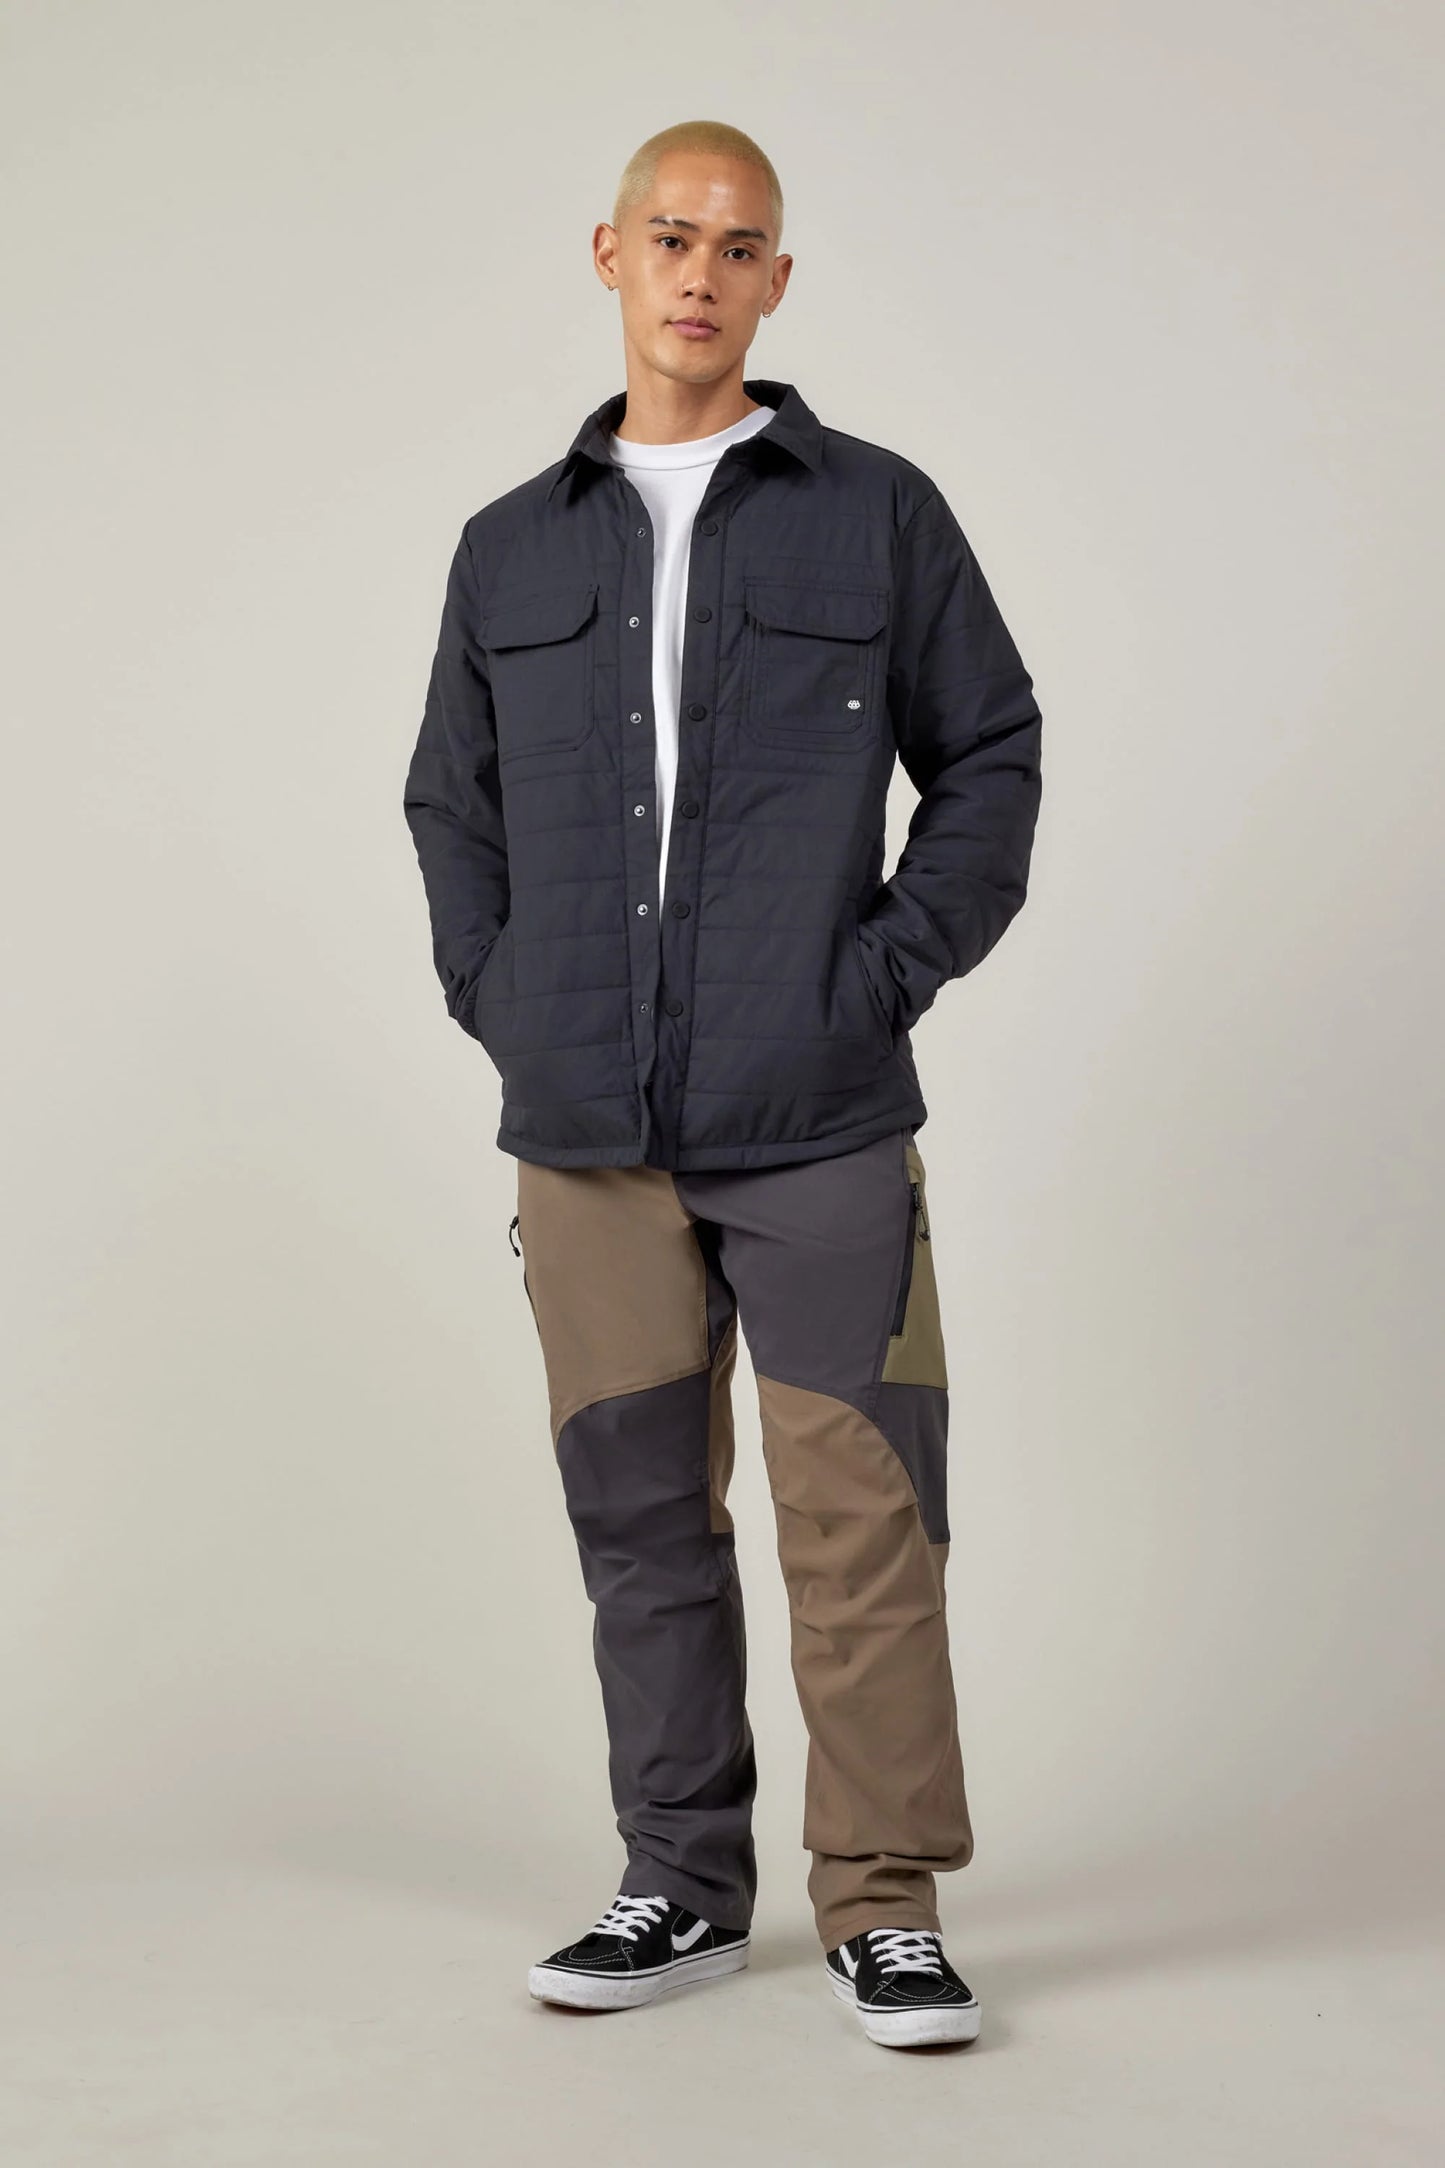 686 - Men's Anything Cargo Pant - Relaxed Fit